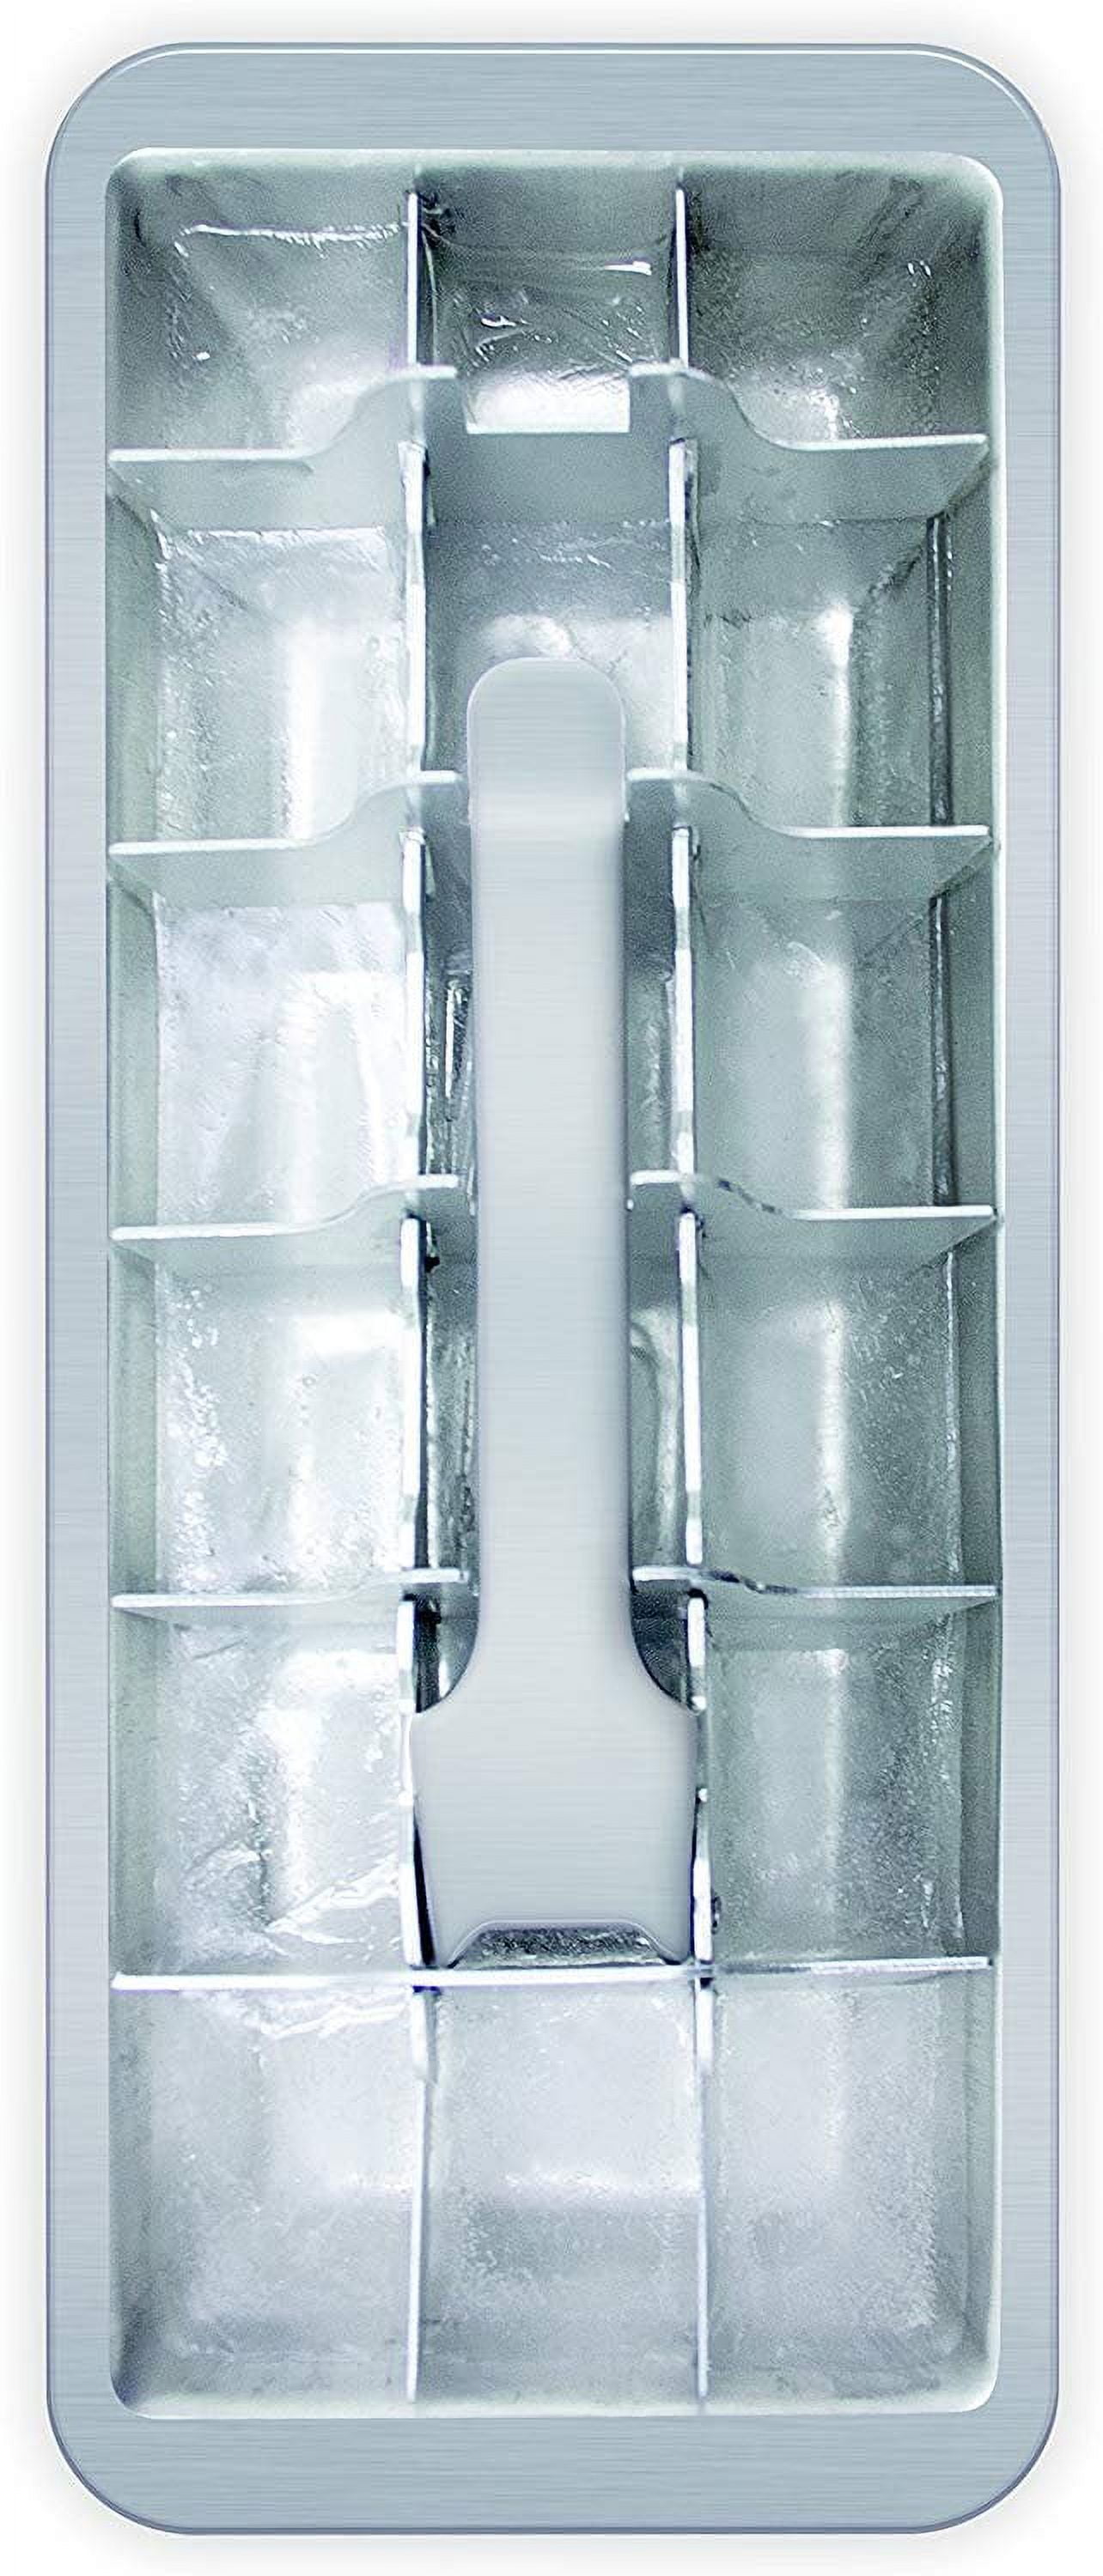 6409957 4 X 11 In. Silver Ice Cube Tray